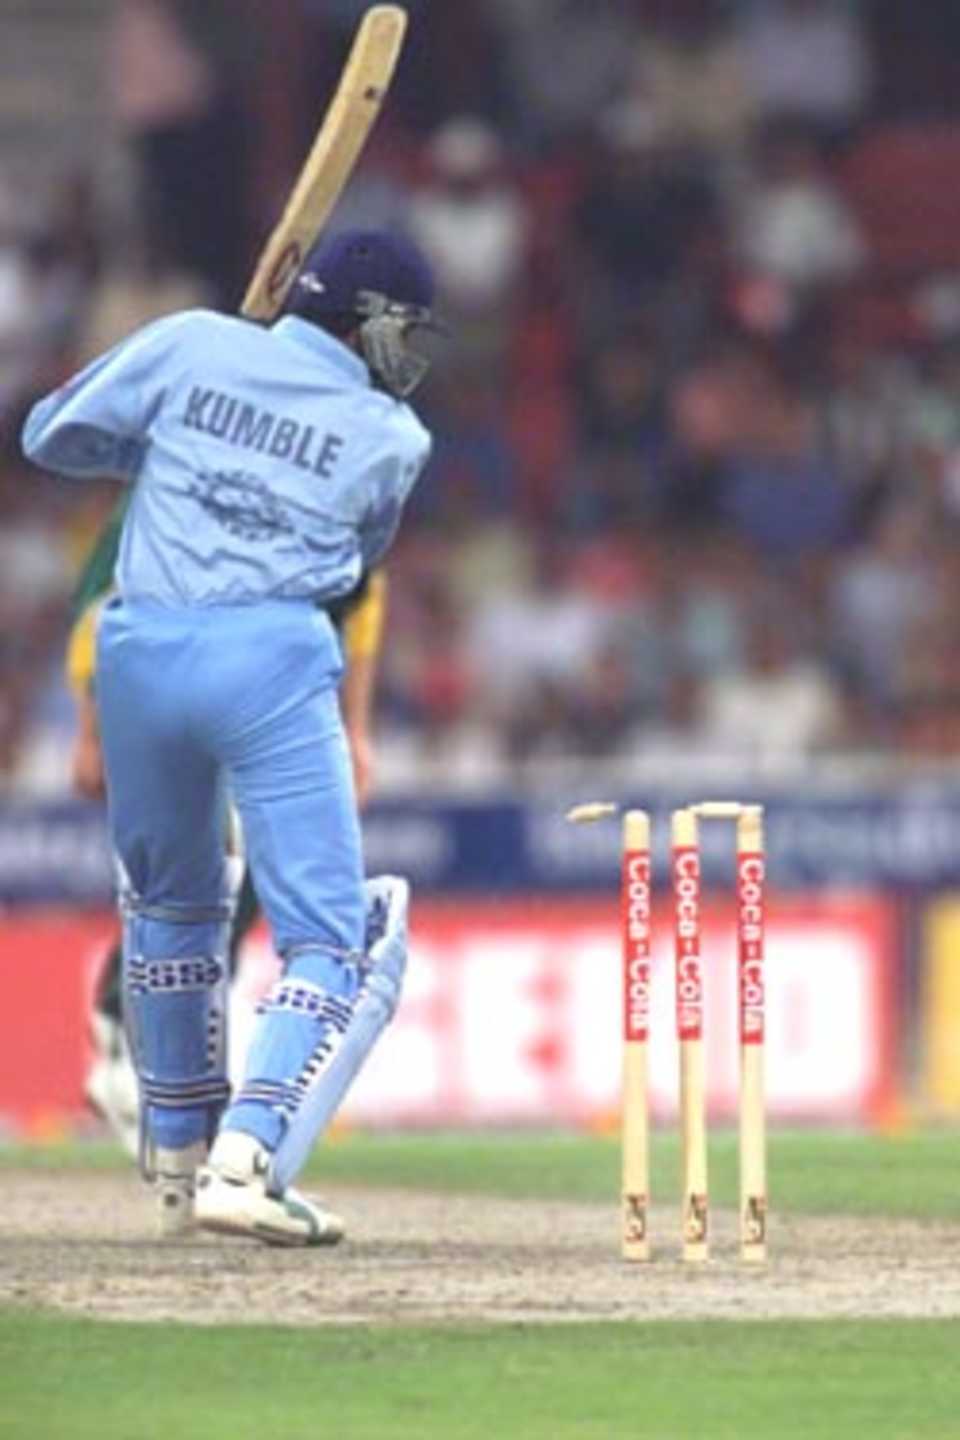 Anil Kumble cleaned bowled by Lance Klusener